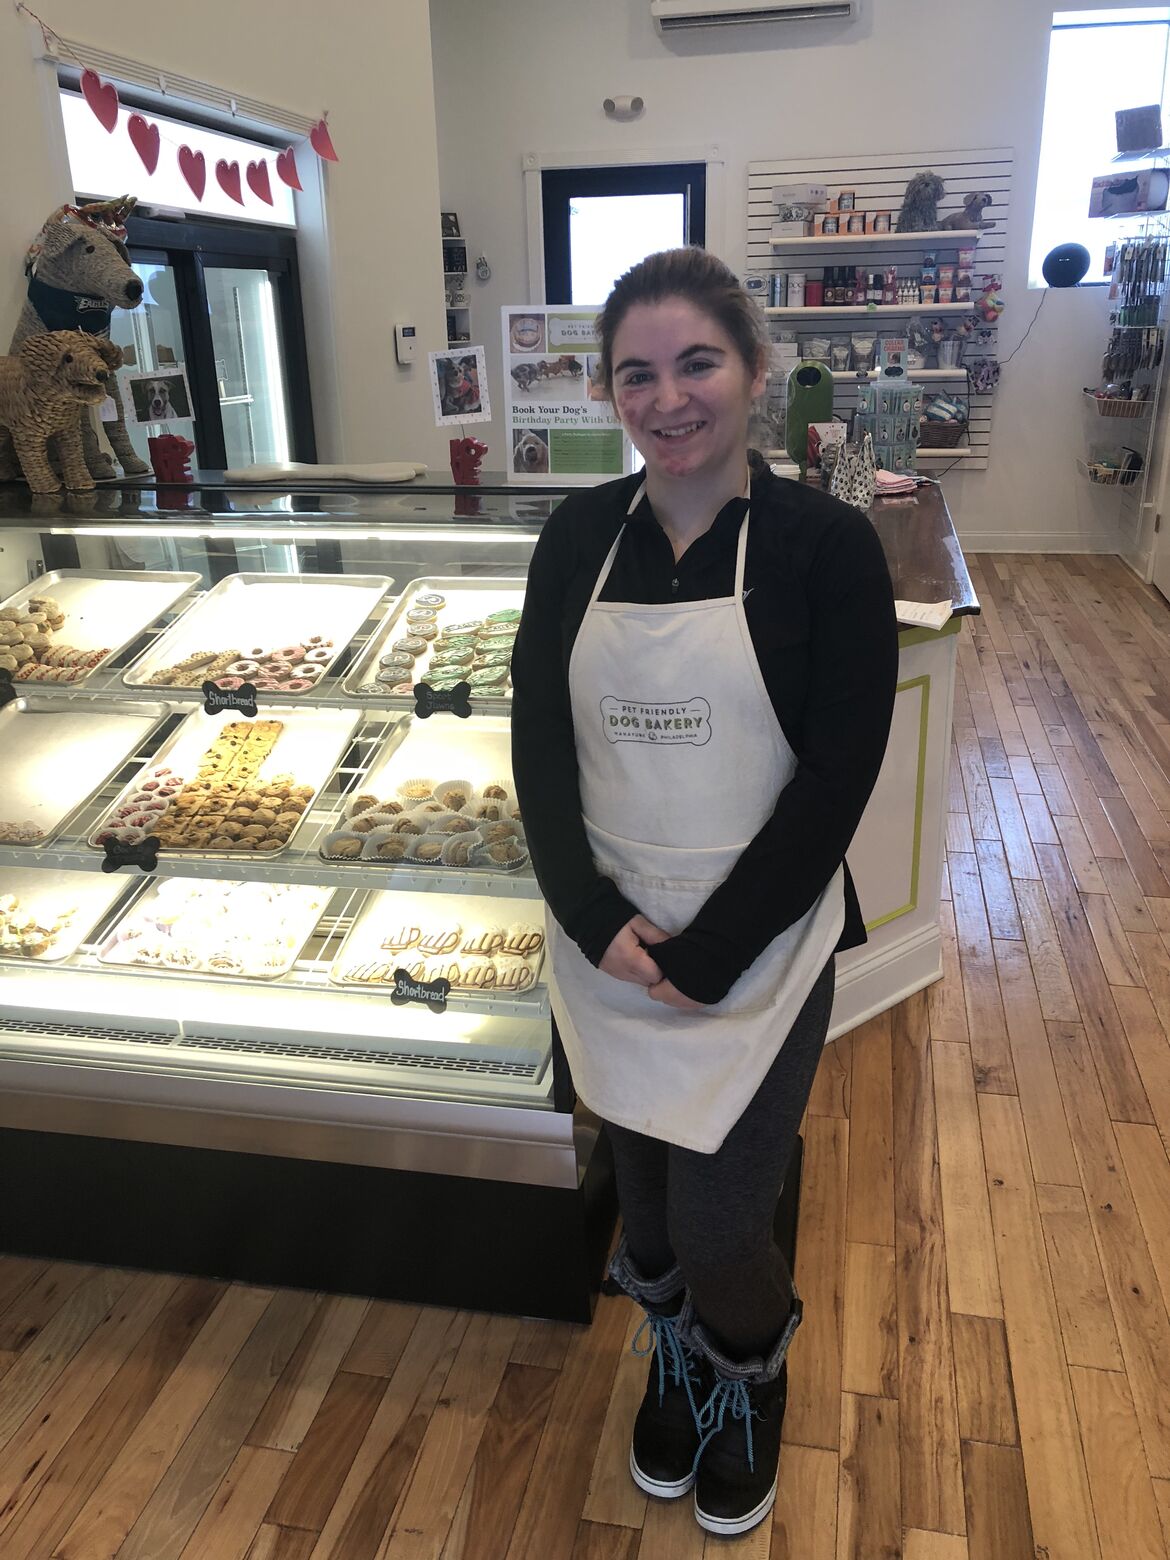 FACES OF MYNK: Today, we talked to the Assistant Manager, Natalie, at Pet Friendly Dog Bakery!